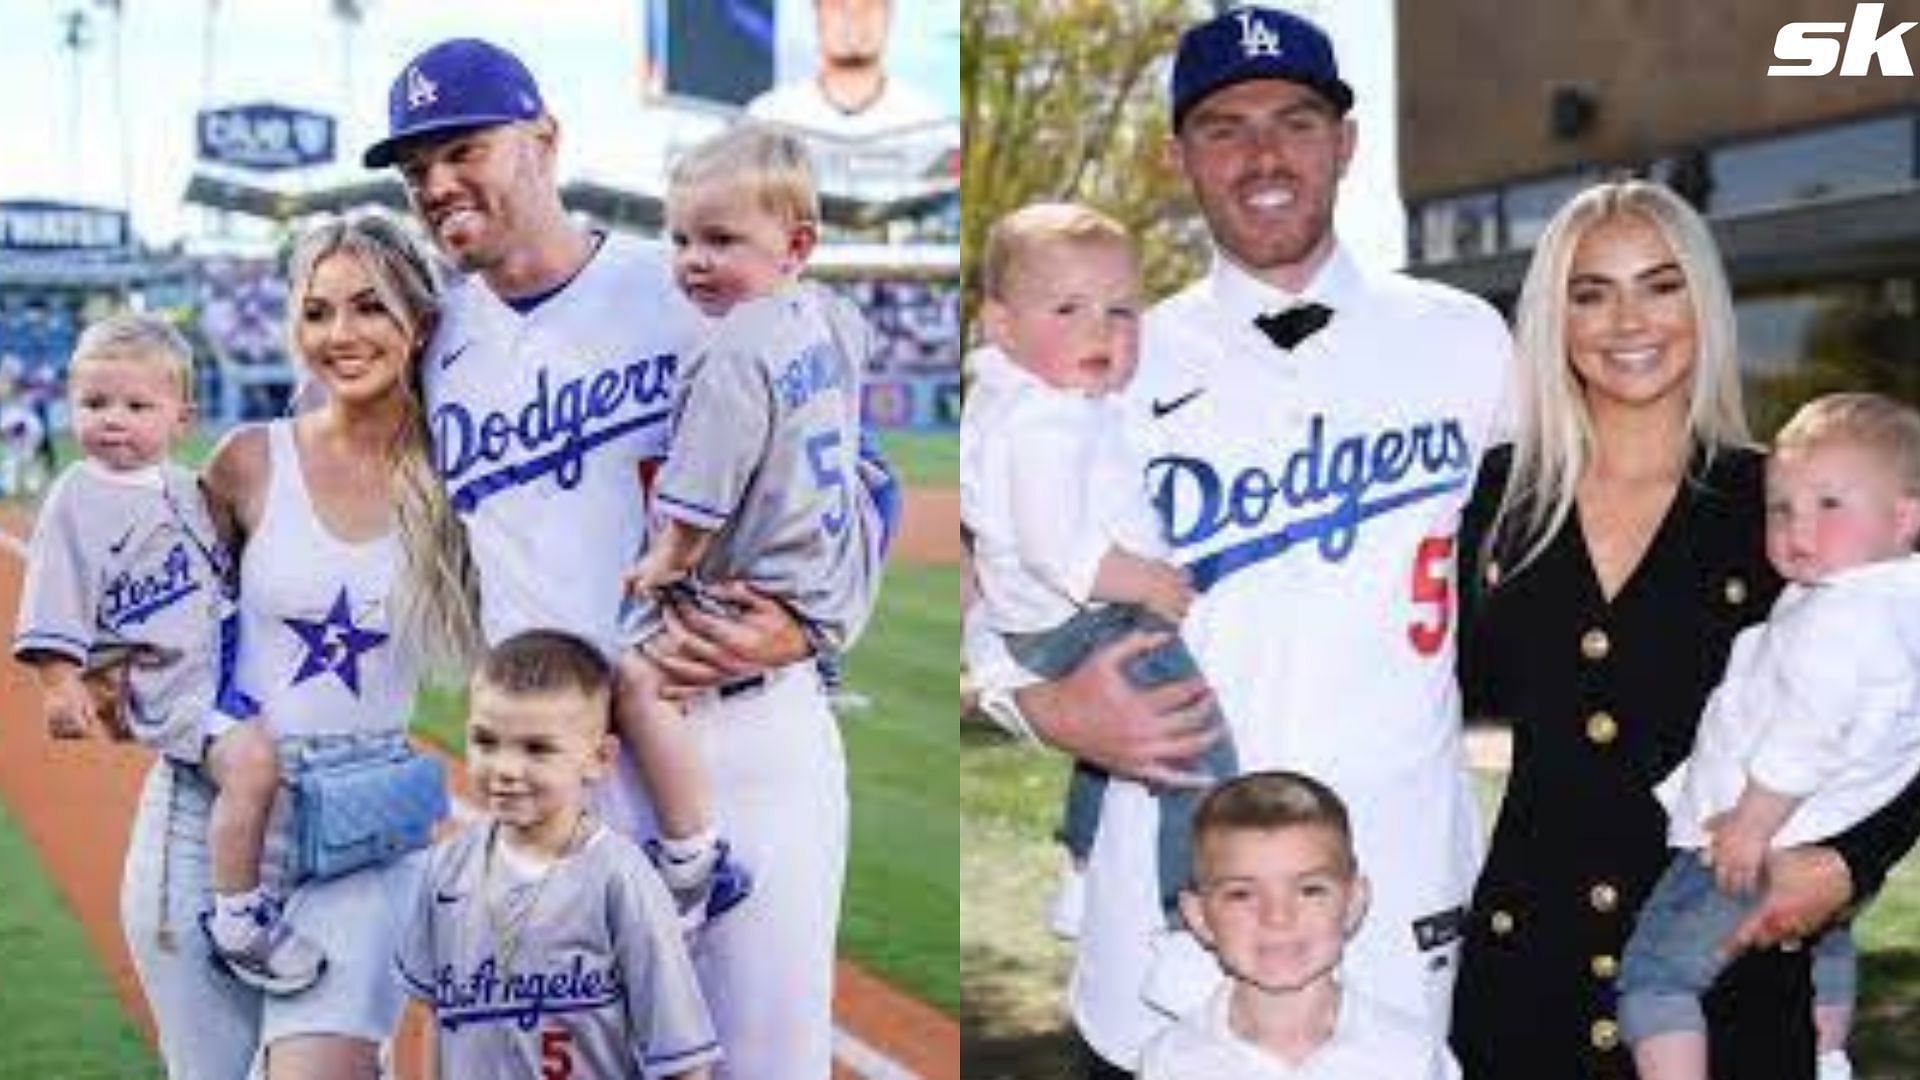 6X All-Star Freddie Freeman's Wife Chelsea Freeman Shares a Beautiful Post  of Him Fulfilling His Duties as a Father on an off Day - EssentiallySports